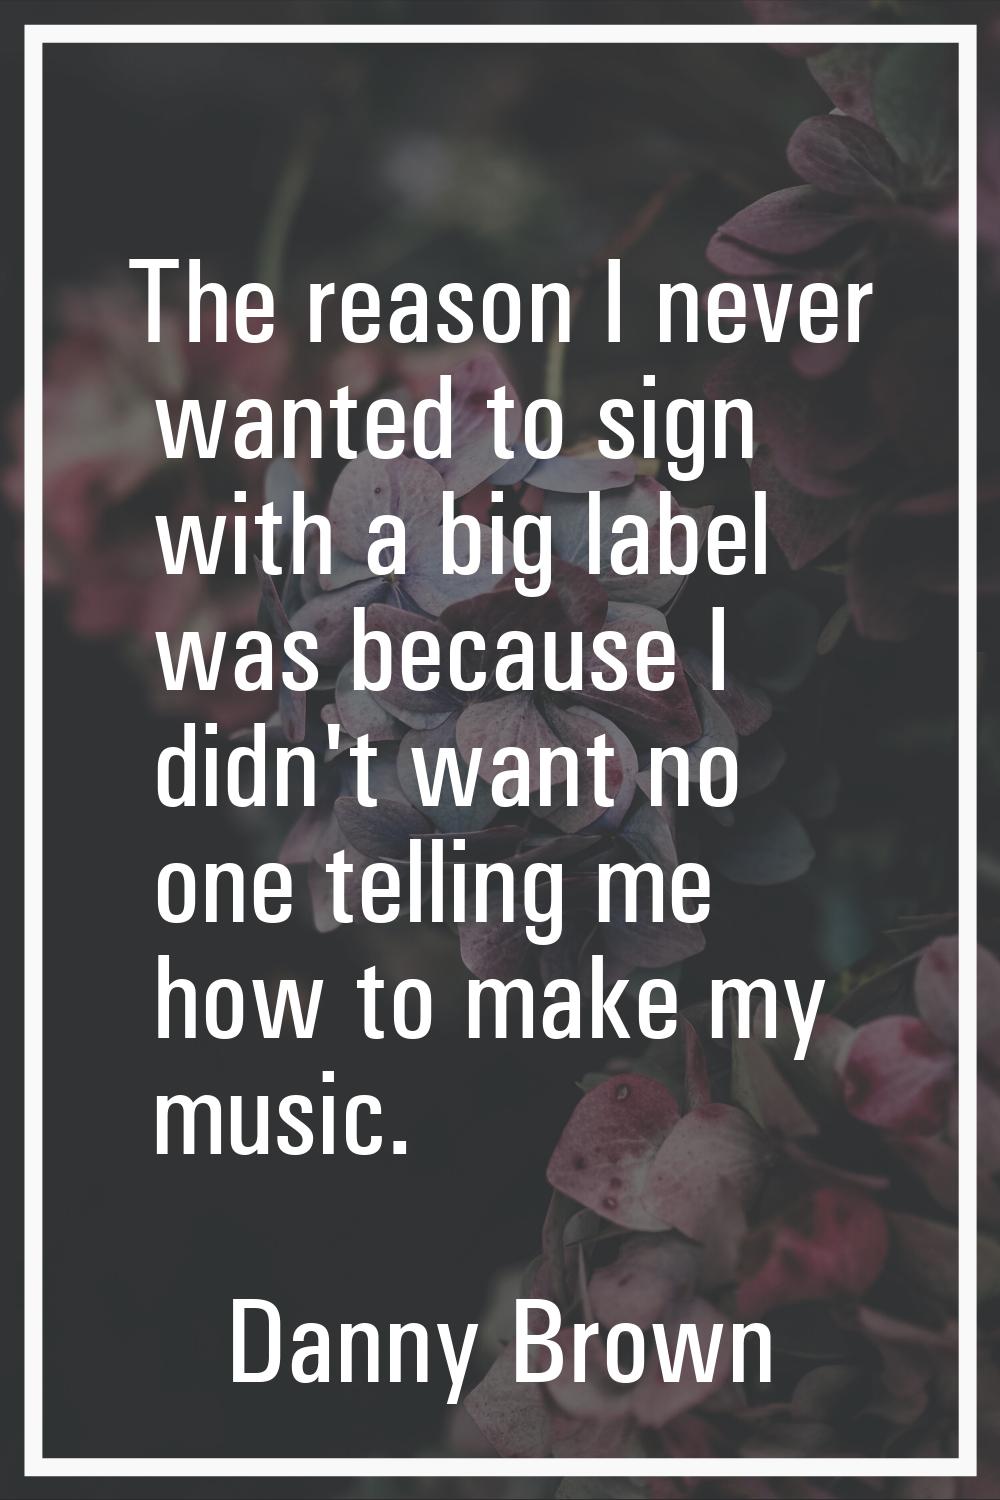 The reason I never wanted to sign with a big label was because I didn't want no one telling me how 